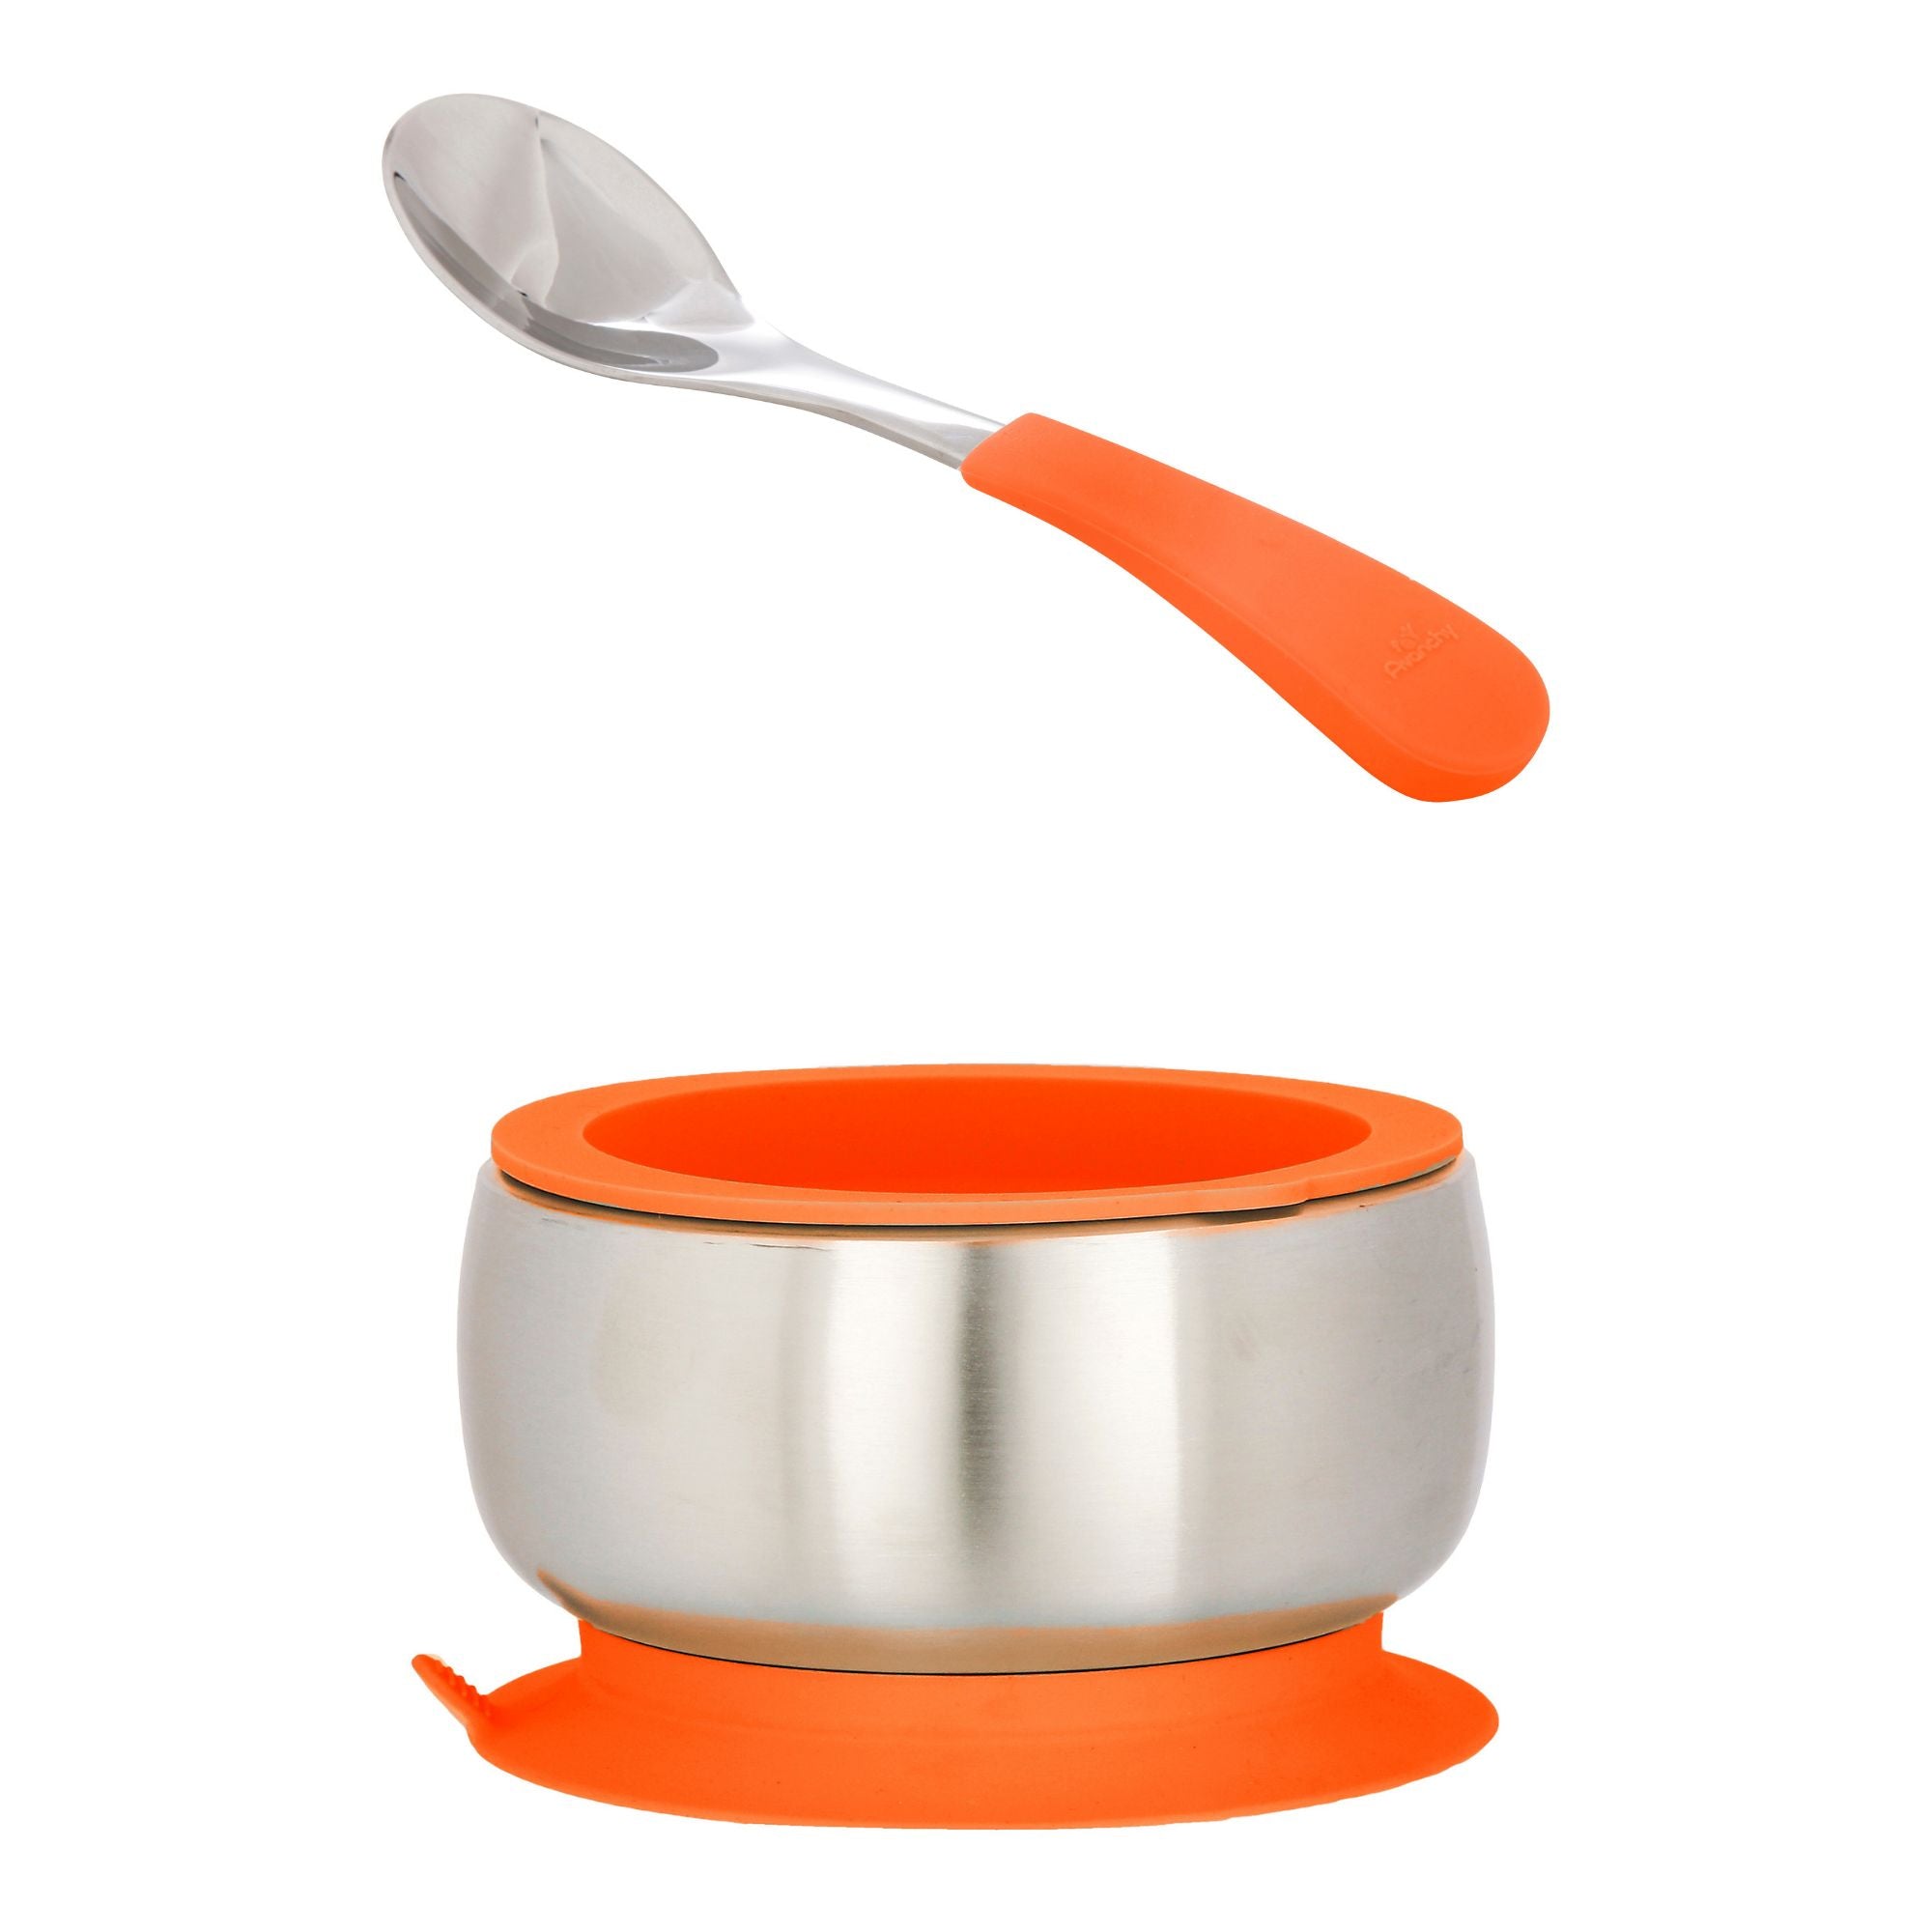 Avanchy | Stainless Steel Suction Bowl, Spoon & Lid